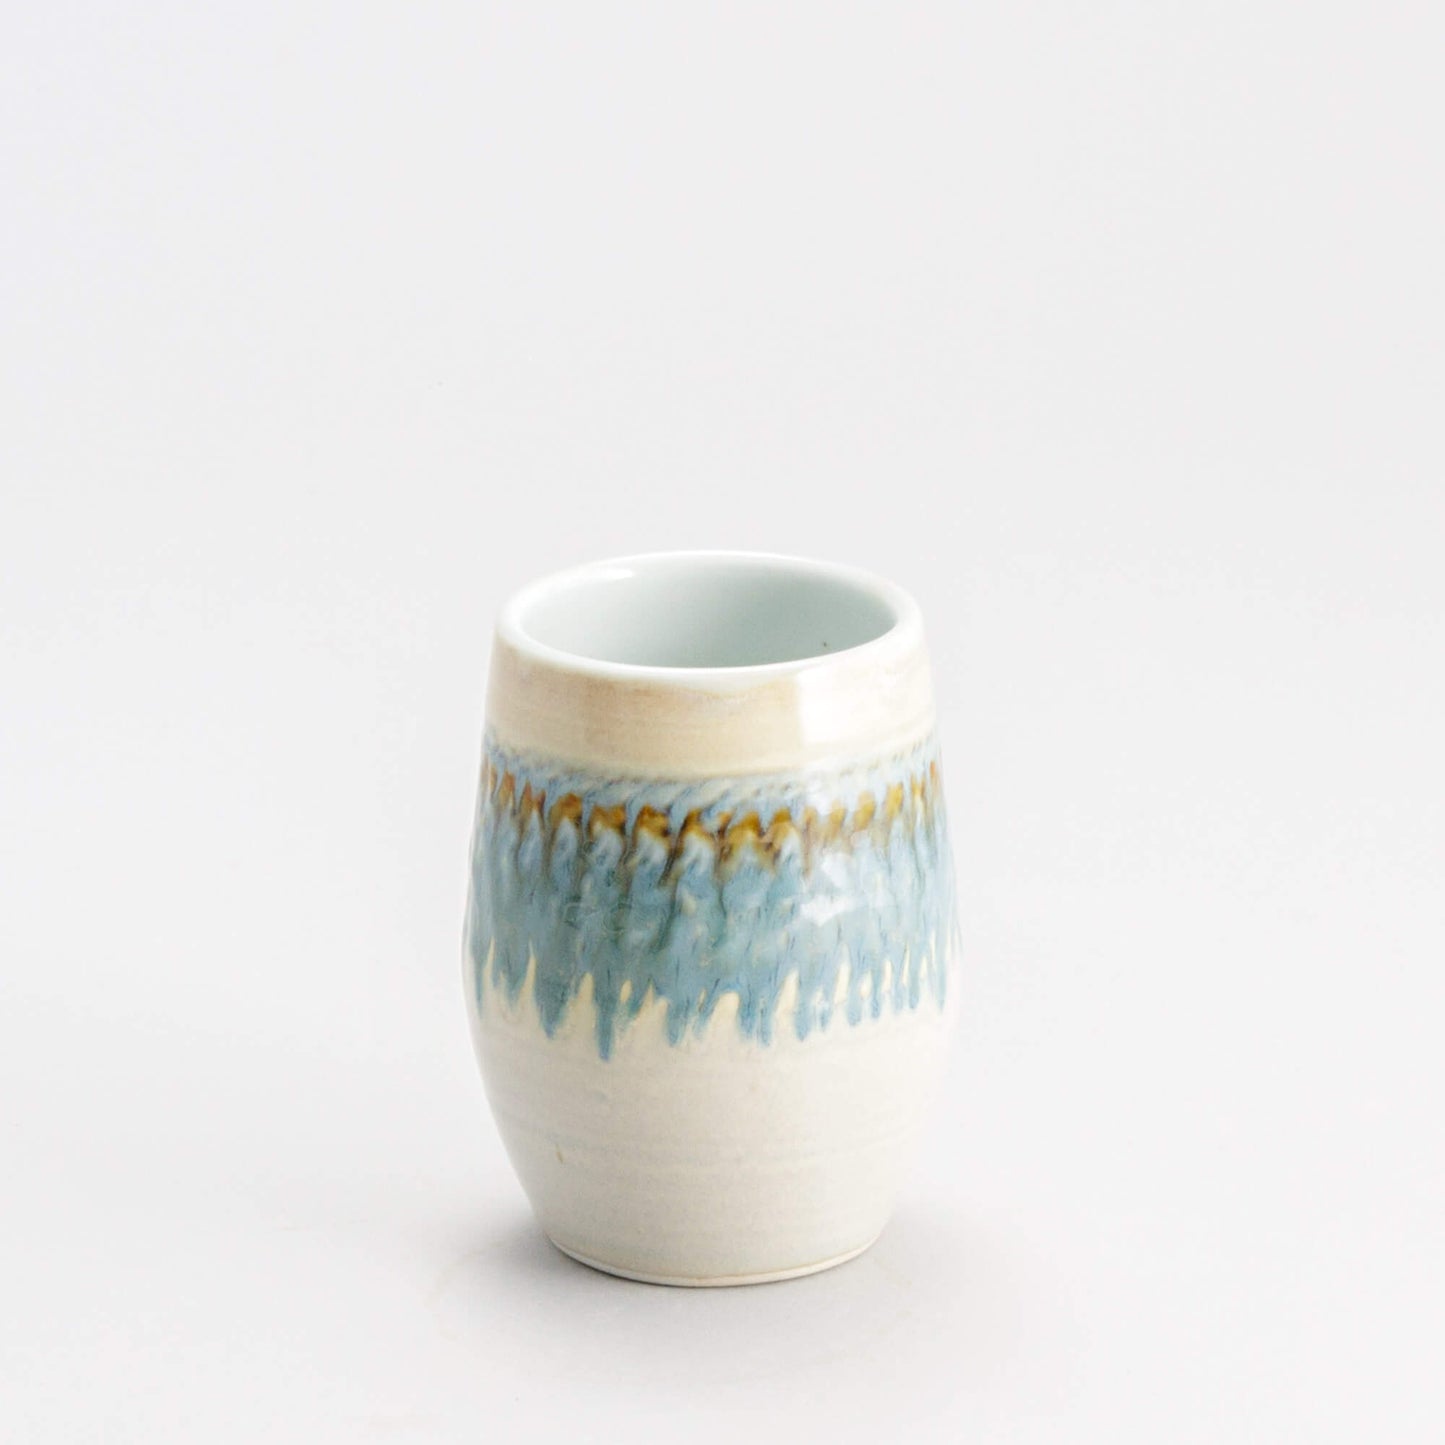 Handmade Pottery Stemless Wine Tumbler made by Georgetown Pottery in Maine Ivory & Blue Oribe